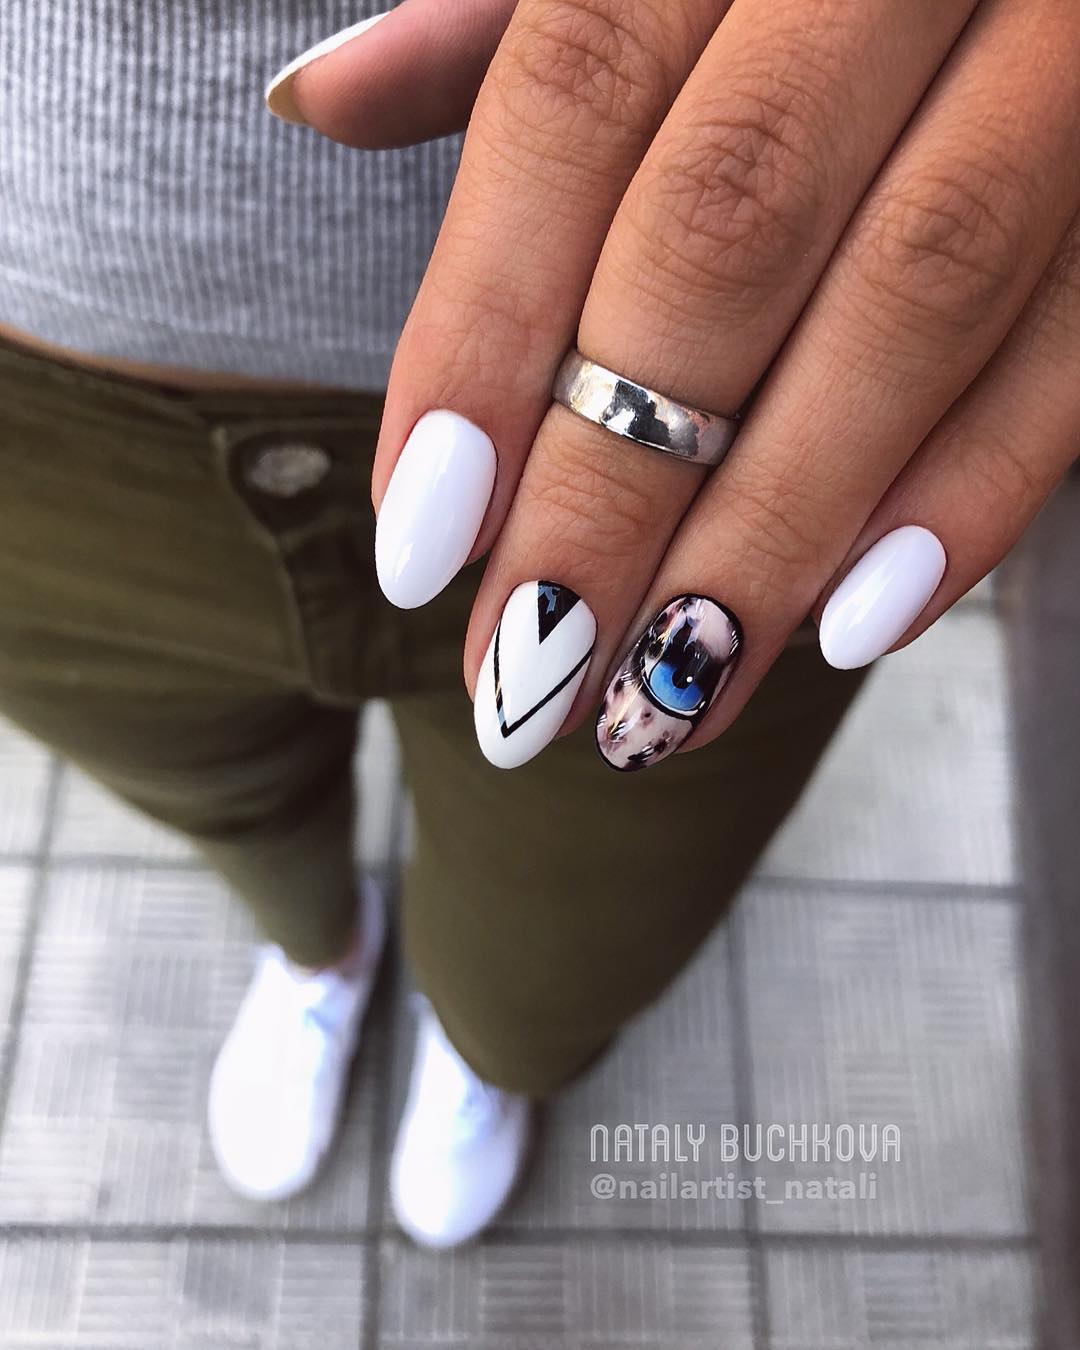 70 Attractive Oval Nail Art Designs and Ideas in 2022